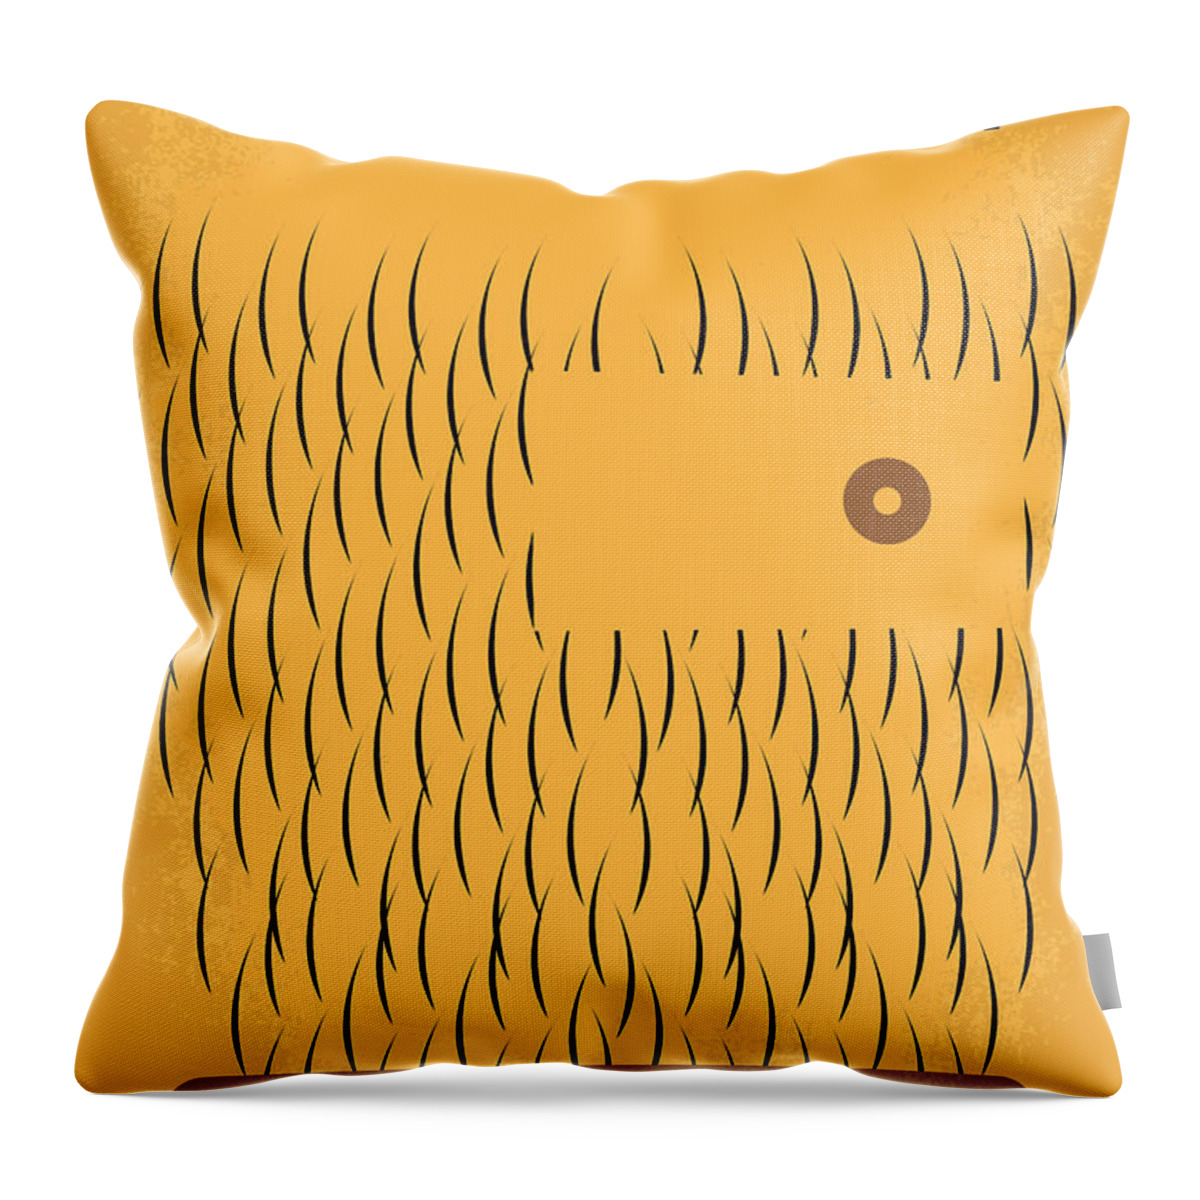 The Throw Pillow featuring the digital art No465 My The 40 Year Old Virgin minimal movie poster by Chungkong Art